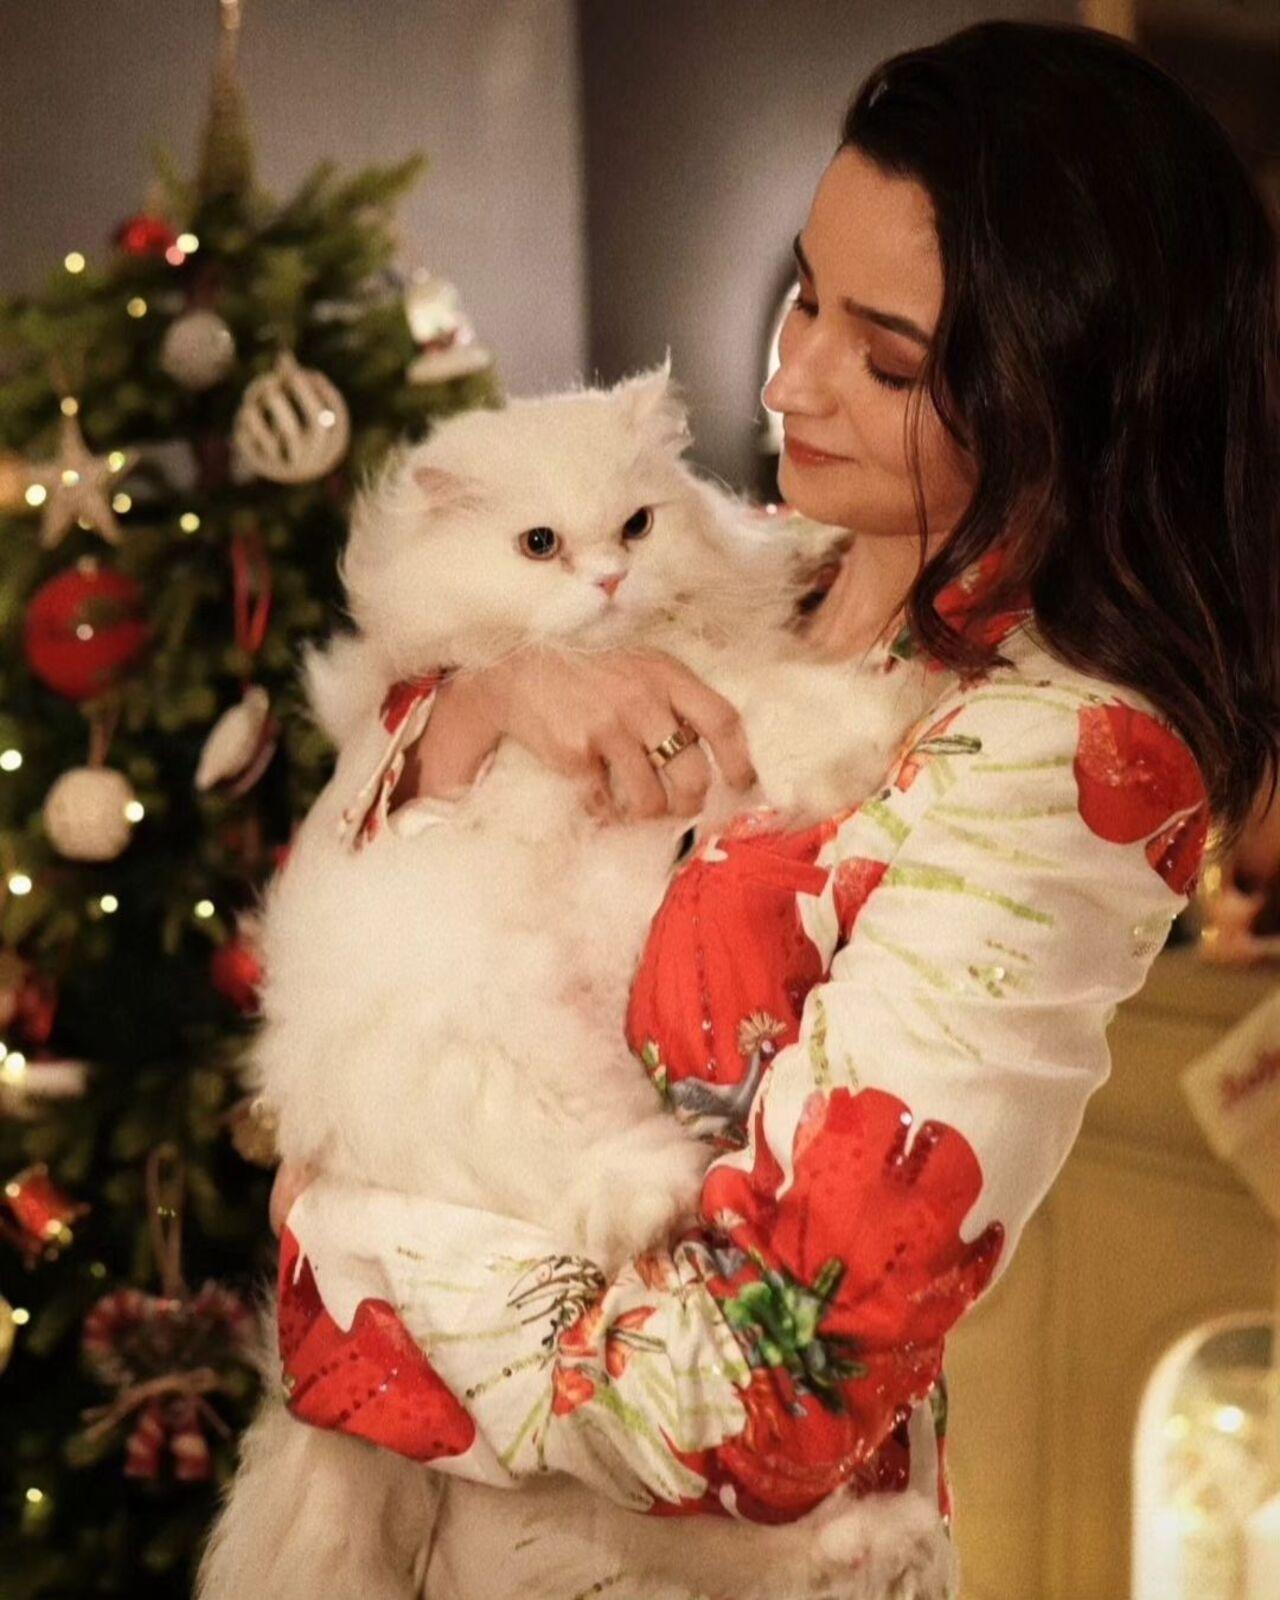 Alia Bhatt sent out season greetings with a photoshoot of herself dressed in a white and red powersuit. She is seen posing in the foreground of a Christmas tree